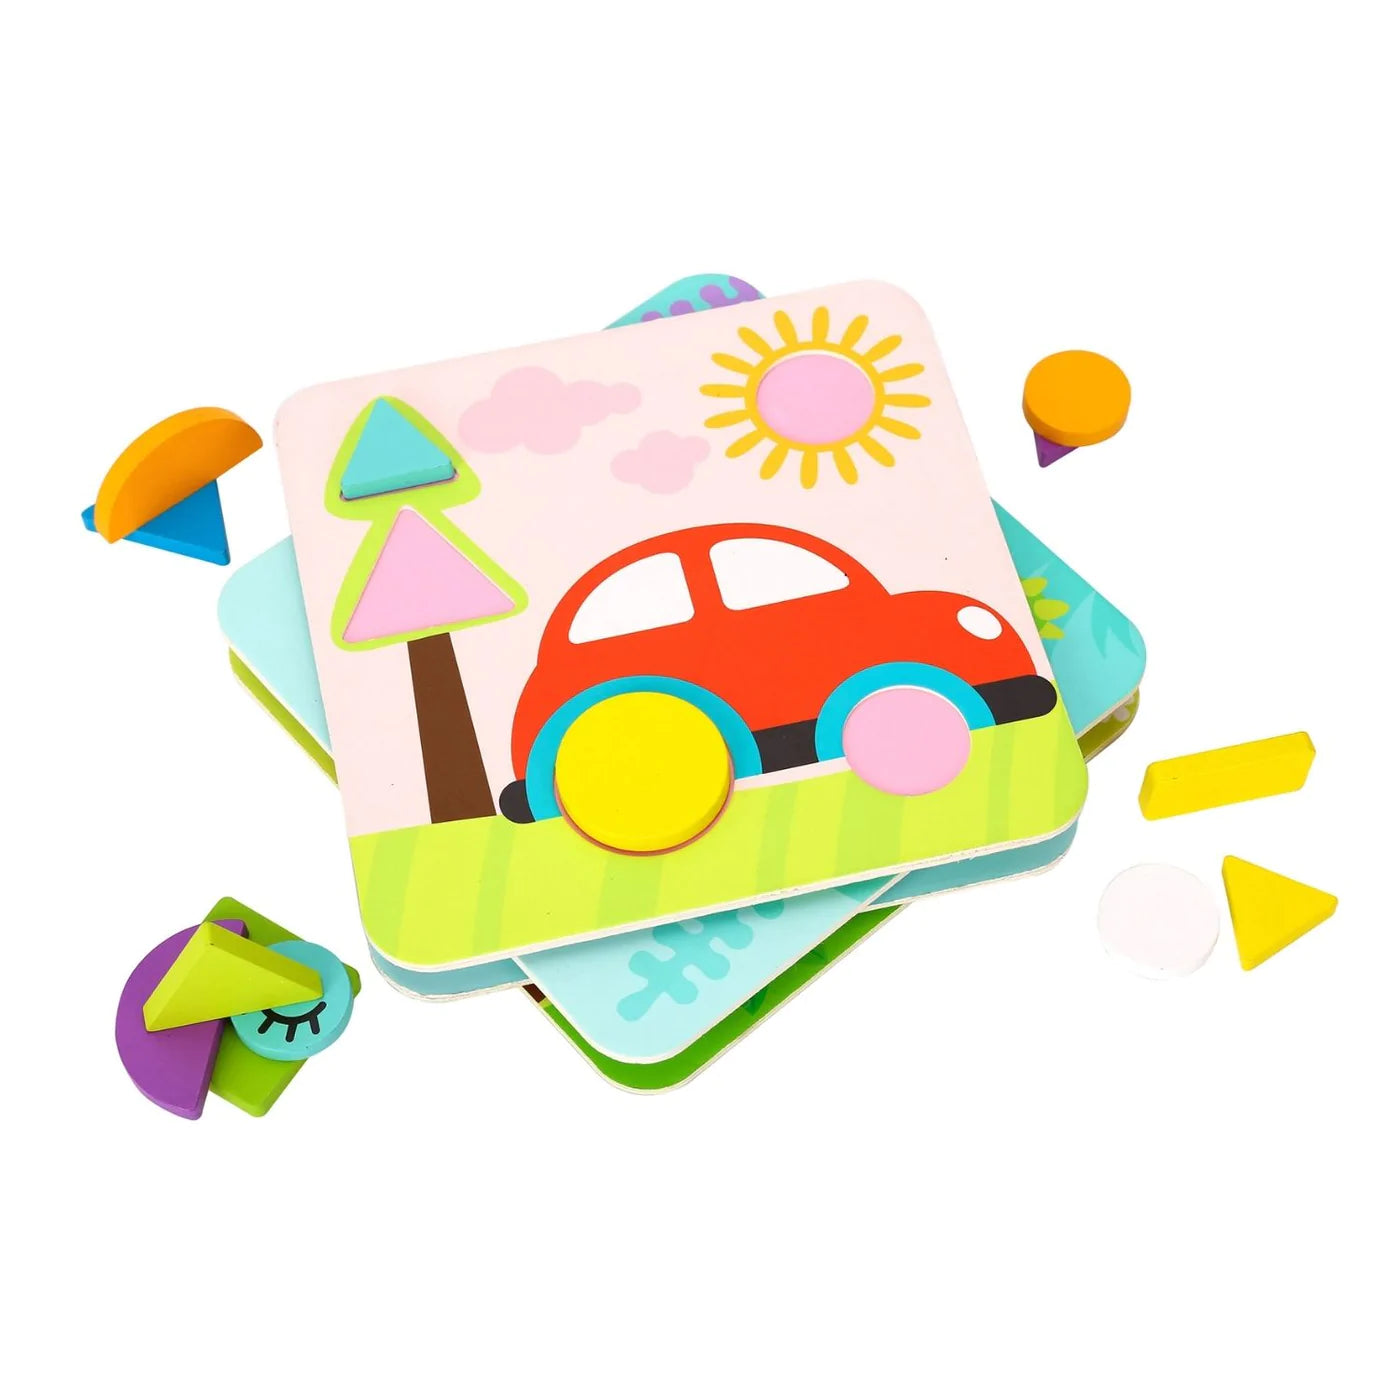 4 in 1 Shape Puzzles - Tooky Toy